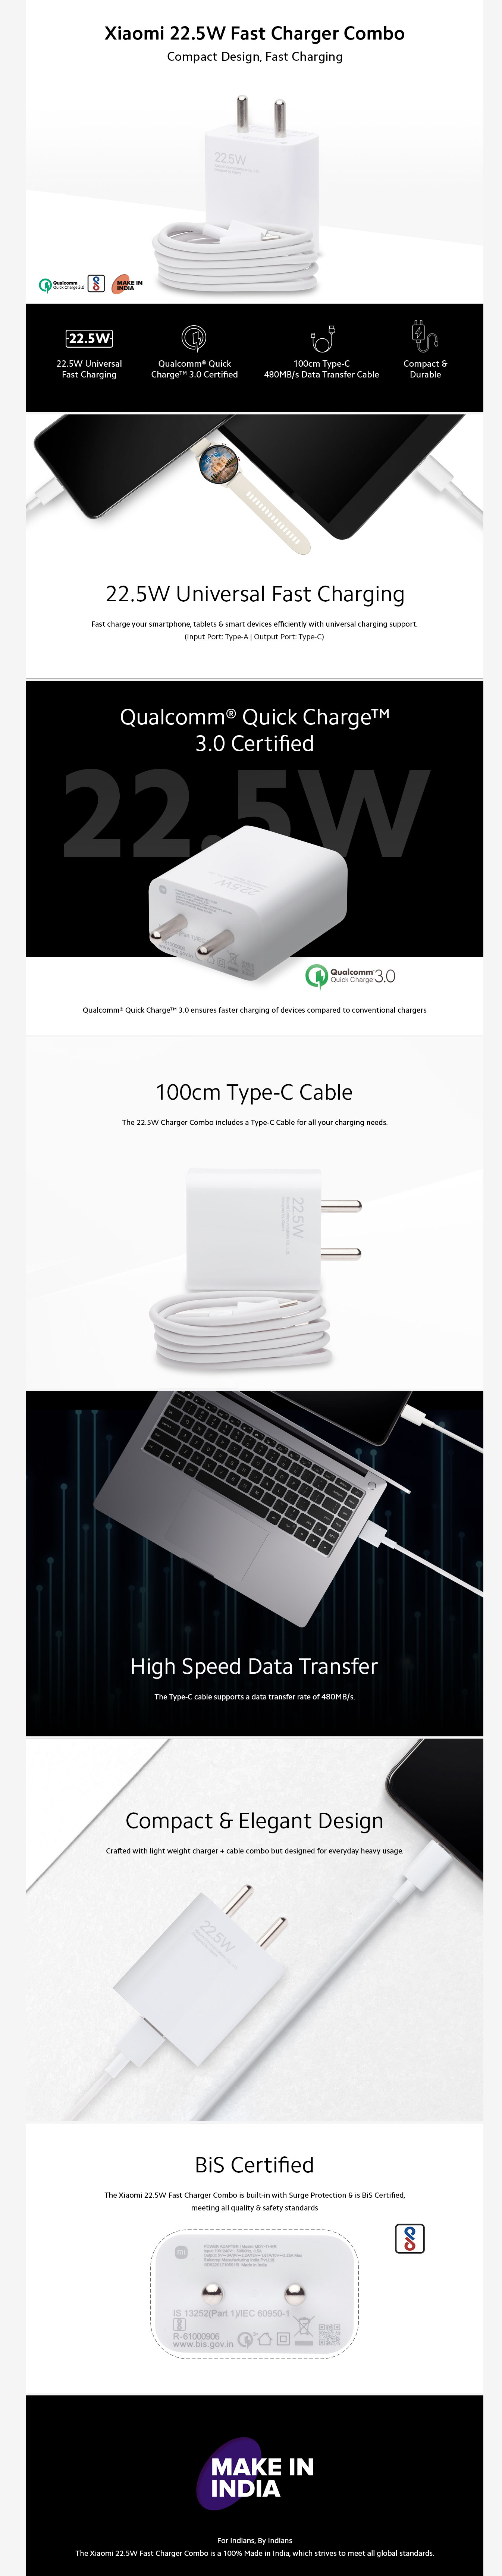 Xiaomi 22.5W Type A Fast Charger (Type A to Type C Cable, Qualcomm Quick Charge 3.0, MI22.5WFASTCHARCOMBO)